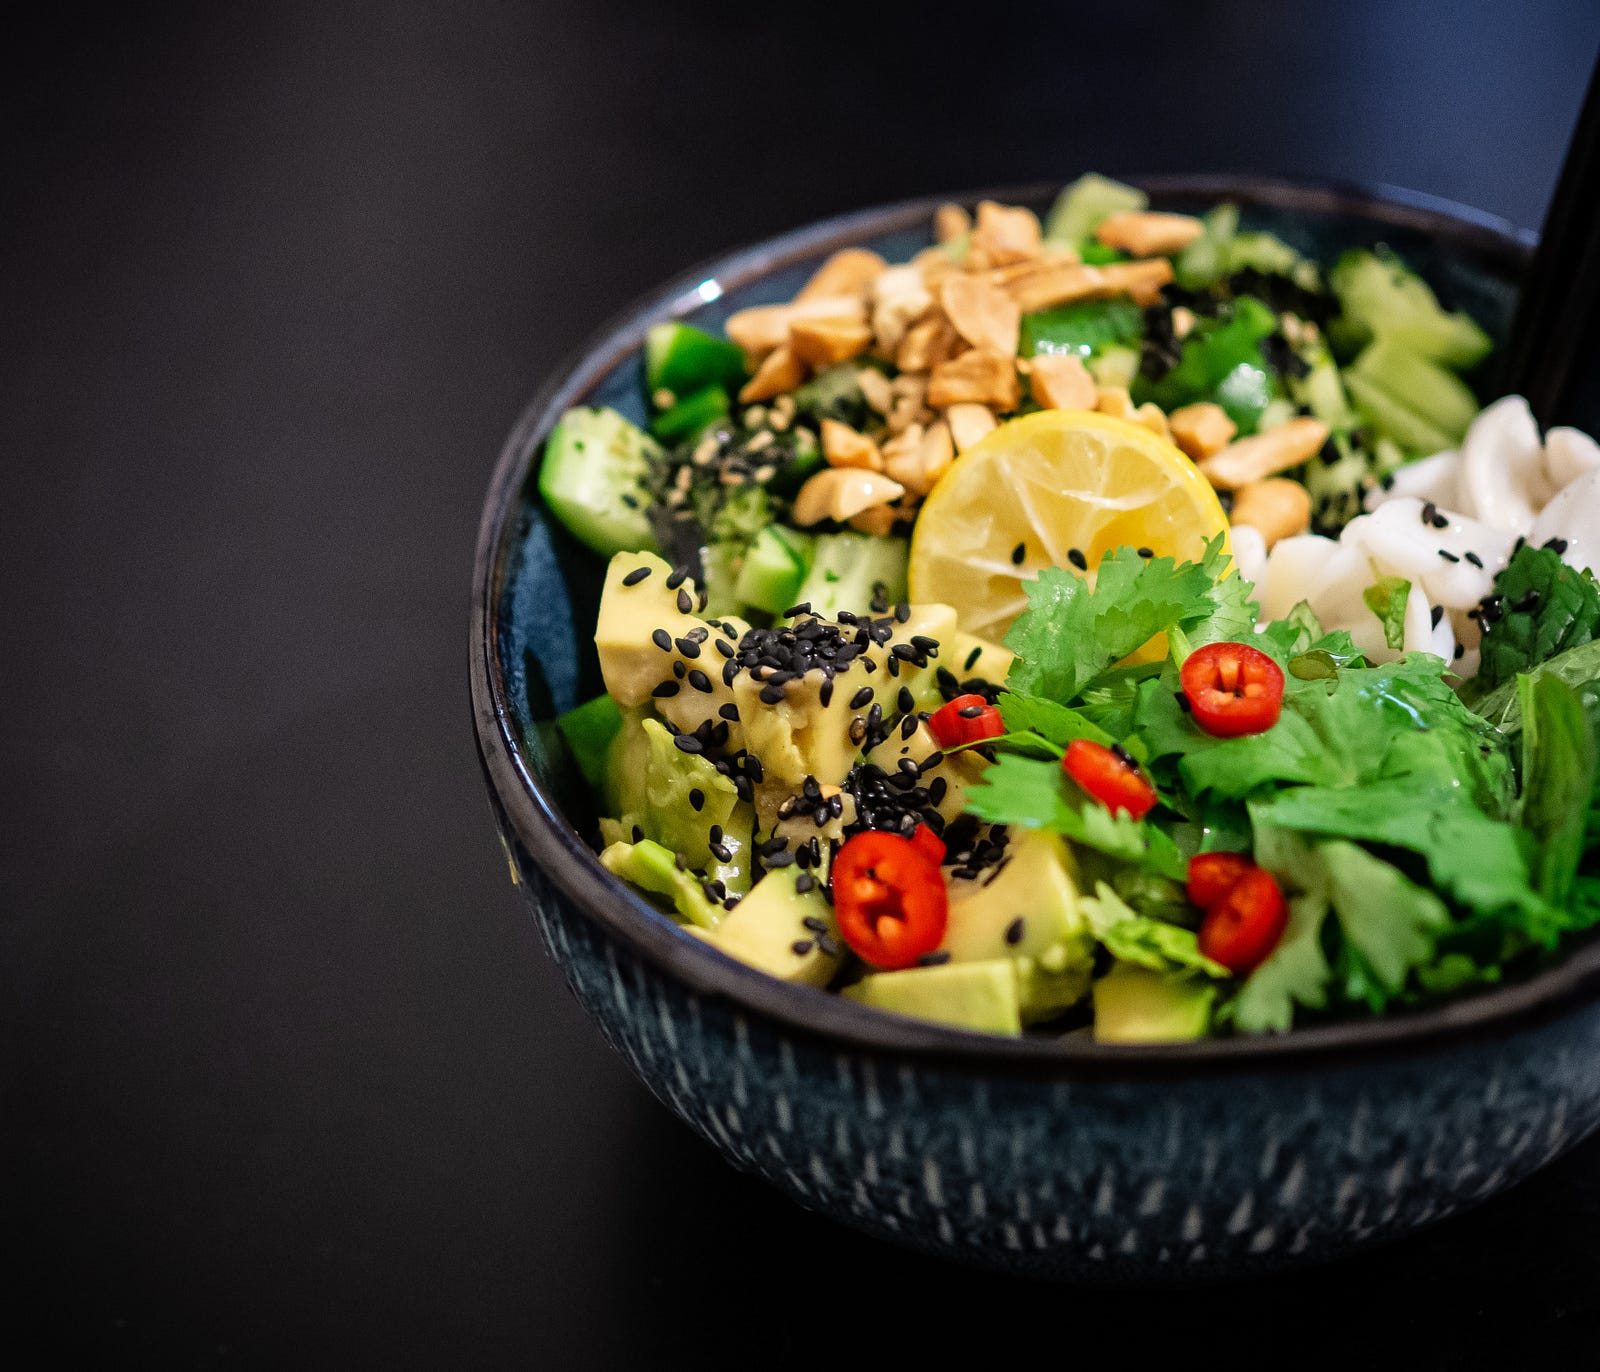 A dark blue bowl with salad. Studies published in the late 1940s reported associations between high-fat diets and elevated cholesterol levels. The logic became this: Drop your dietary fat, and your heart disease risk would fall.